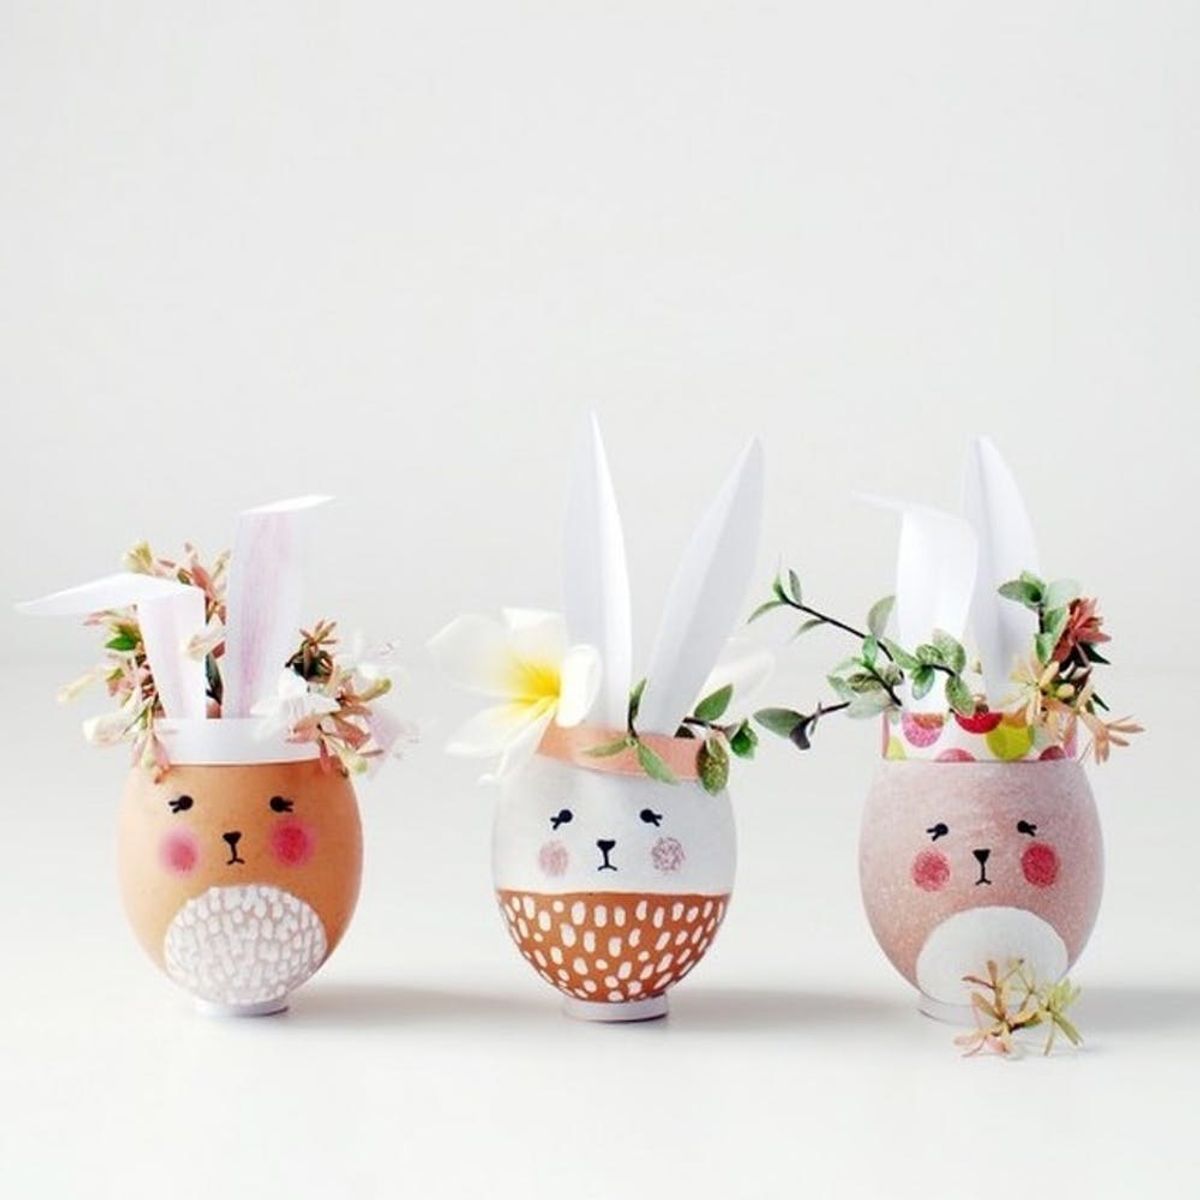 50 DIY Easter Decorations That Go Way Beyond Eggs